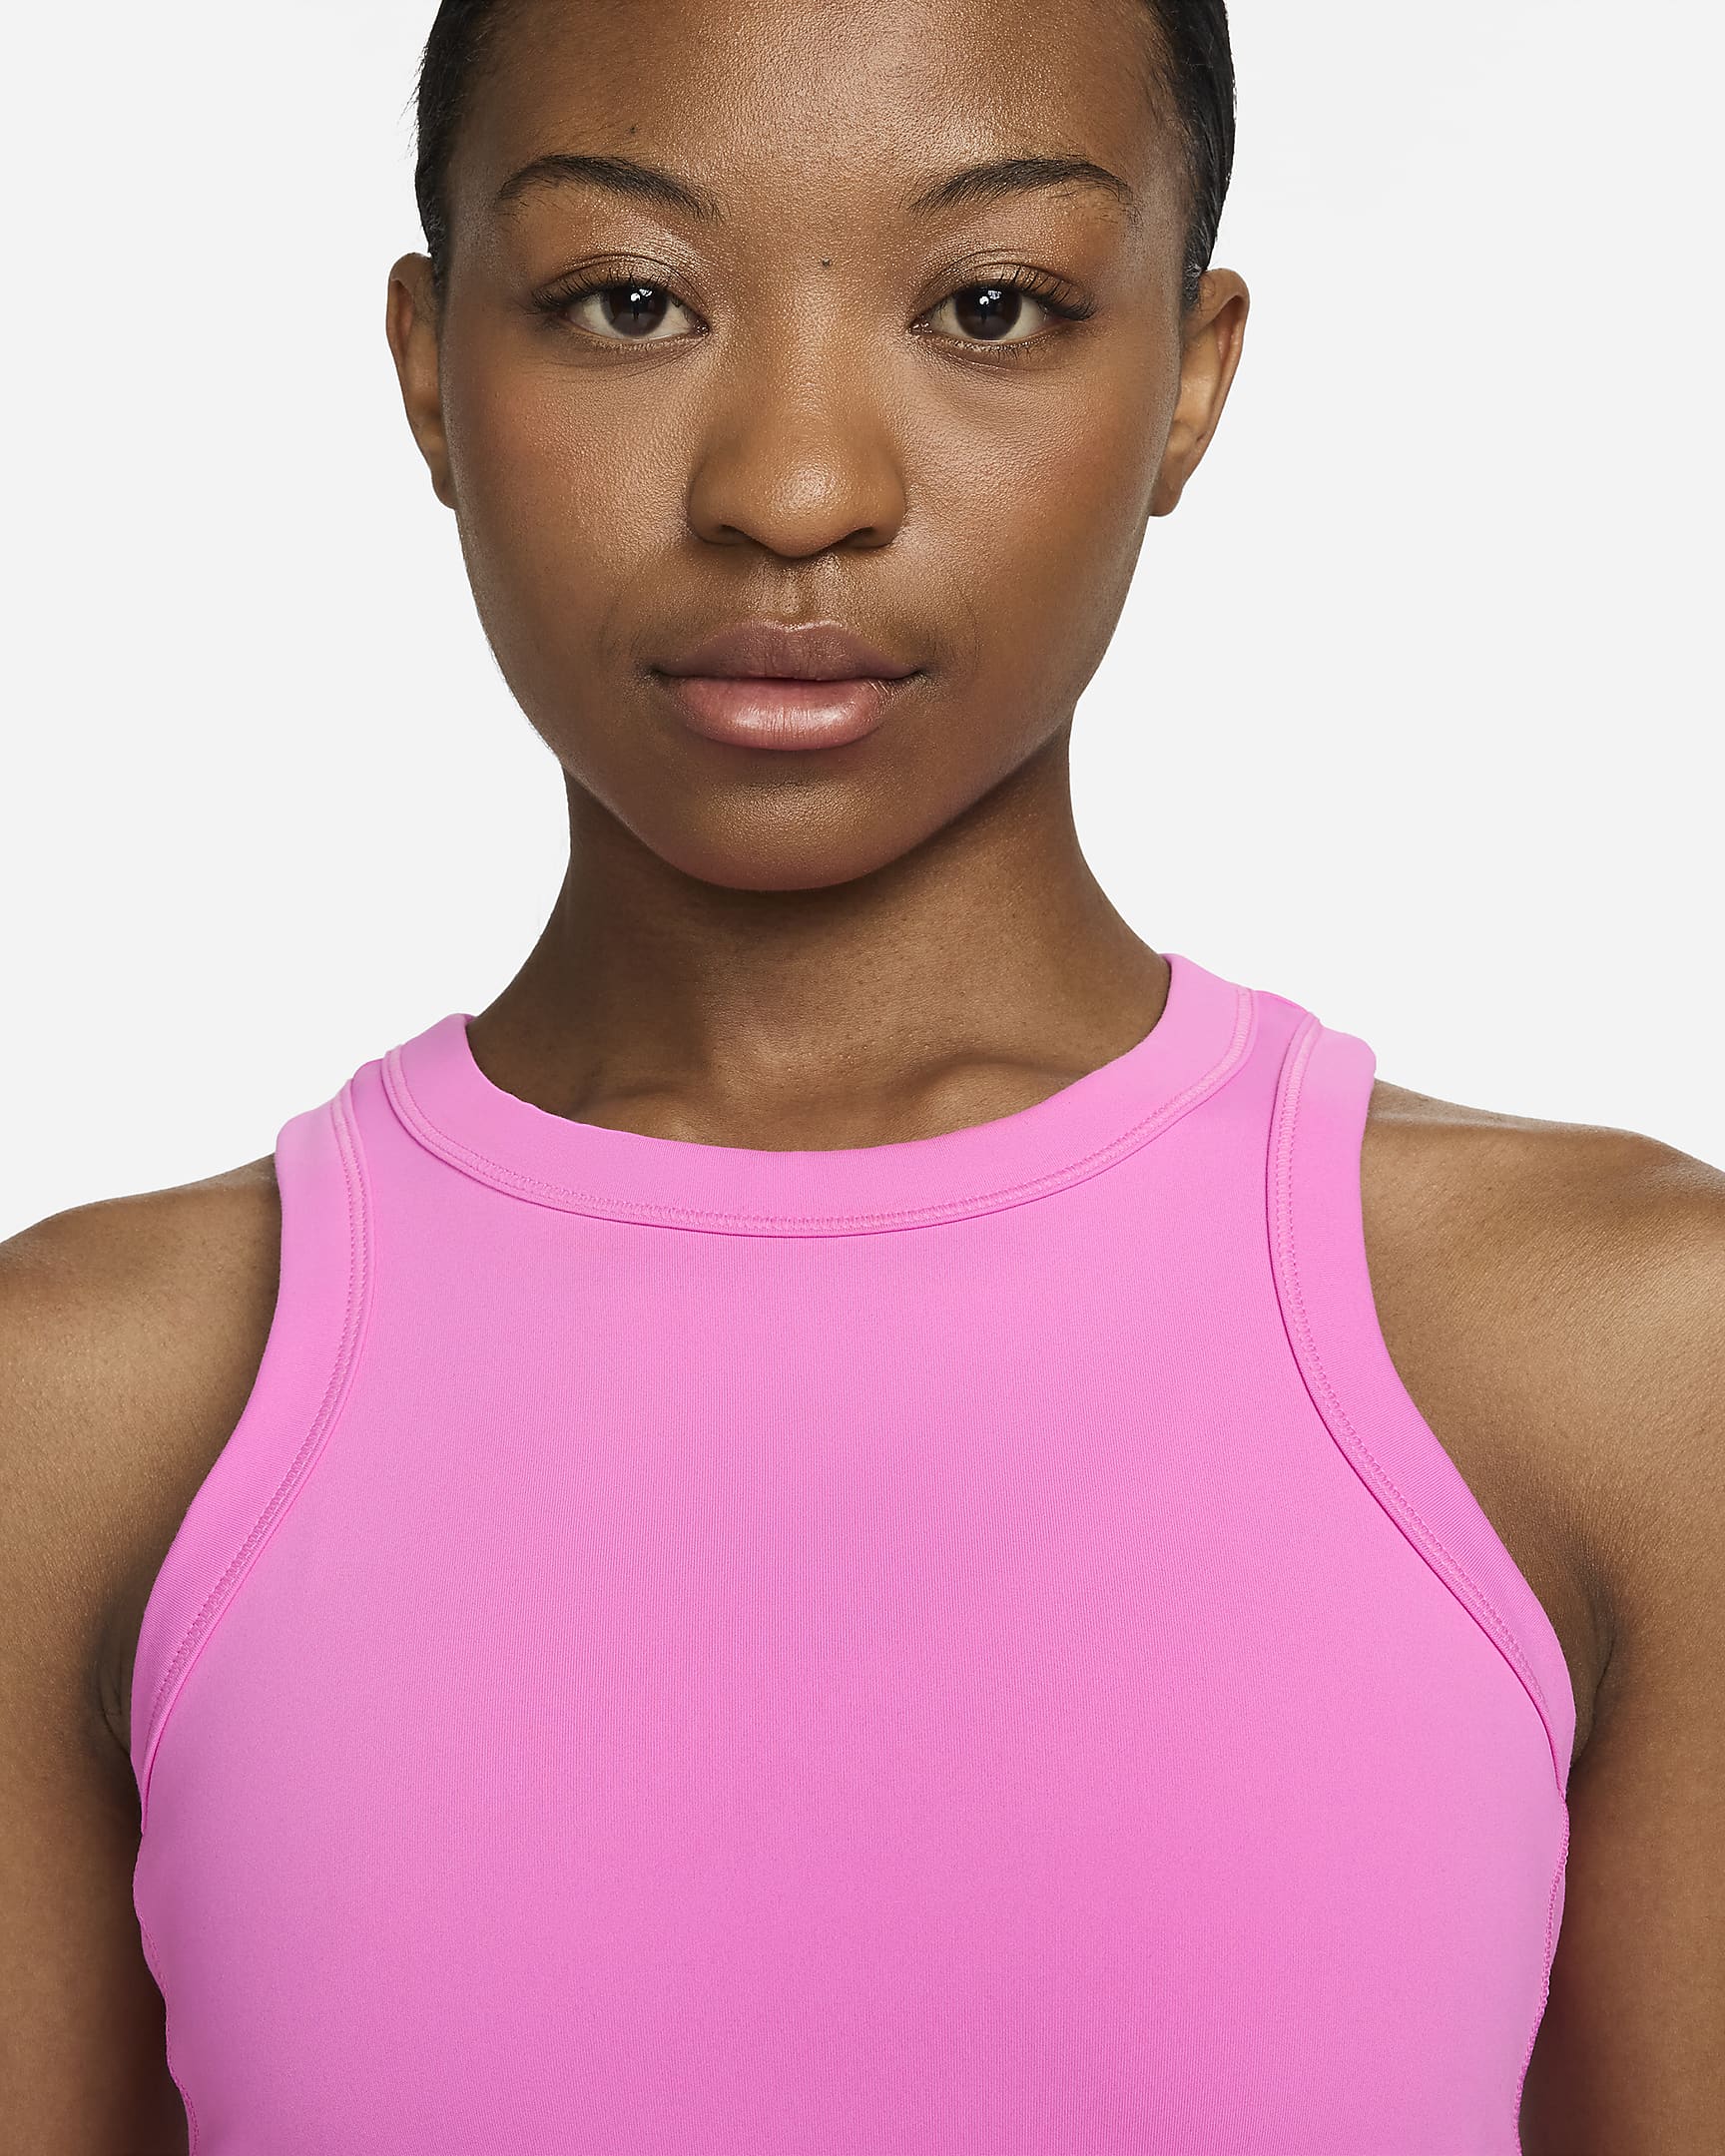 Nike One Fitted Women's Dri-FIT Cropped Tank Top - Playful Pink/Black